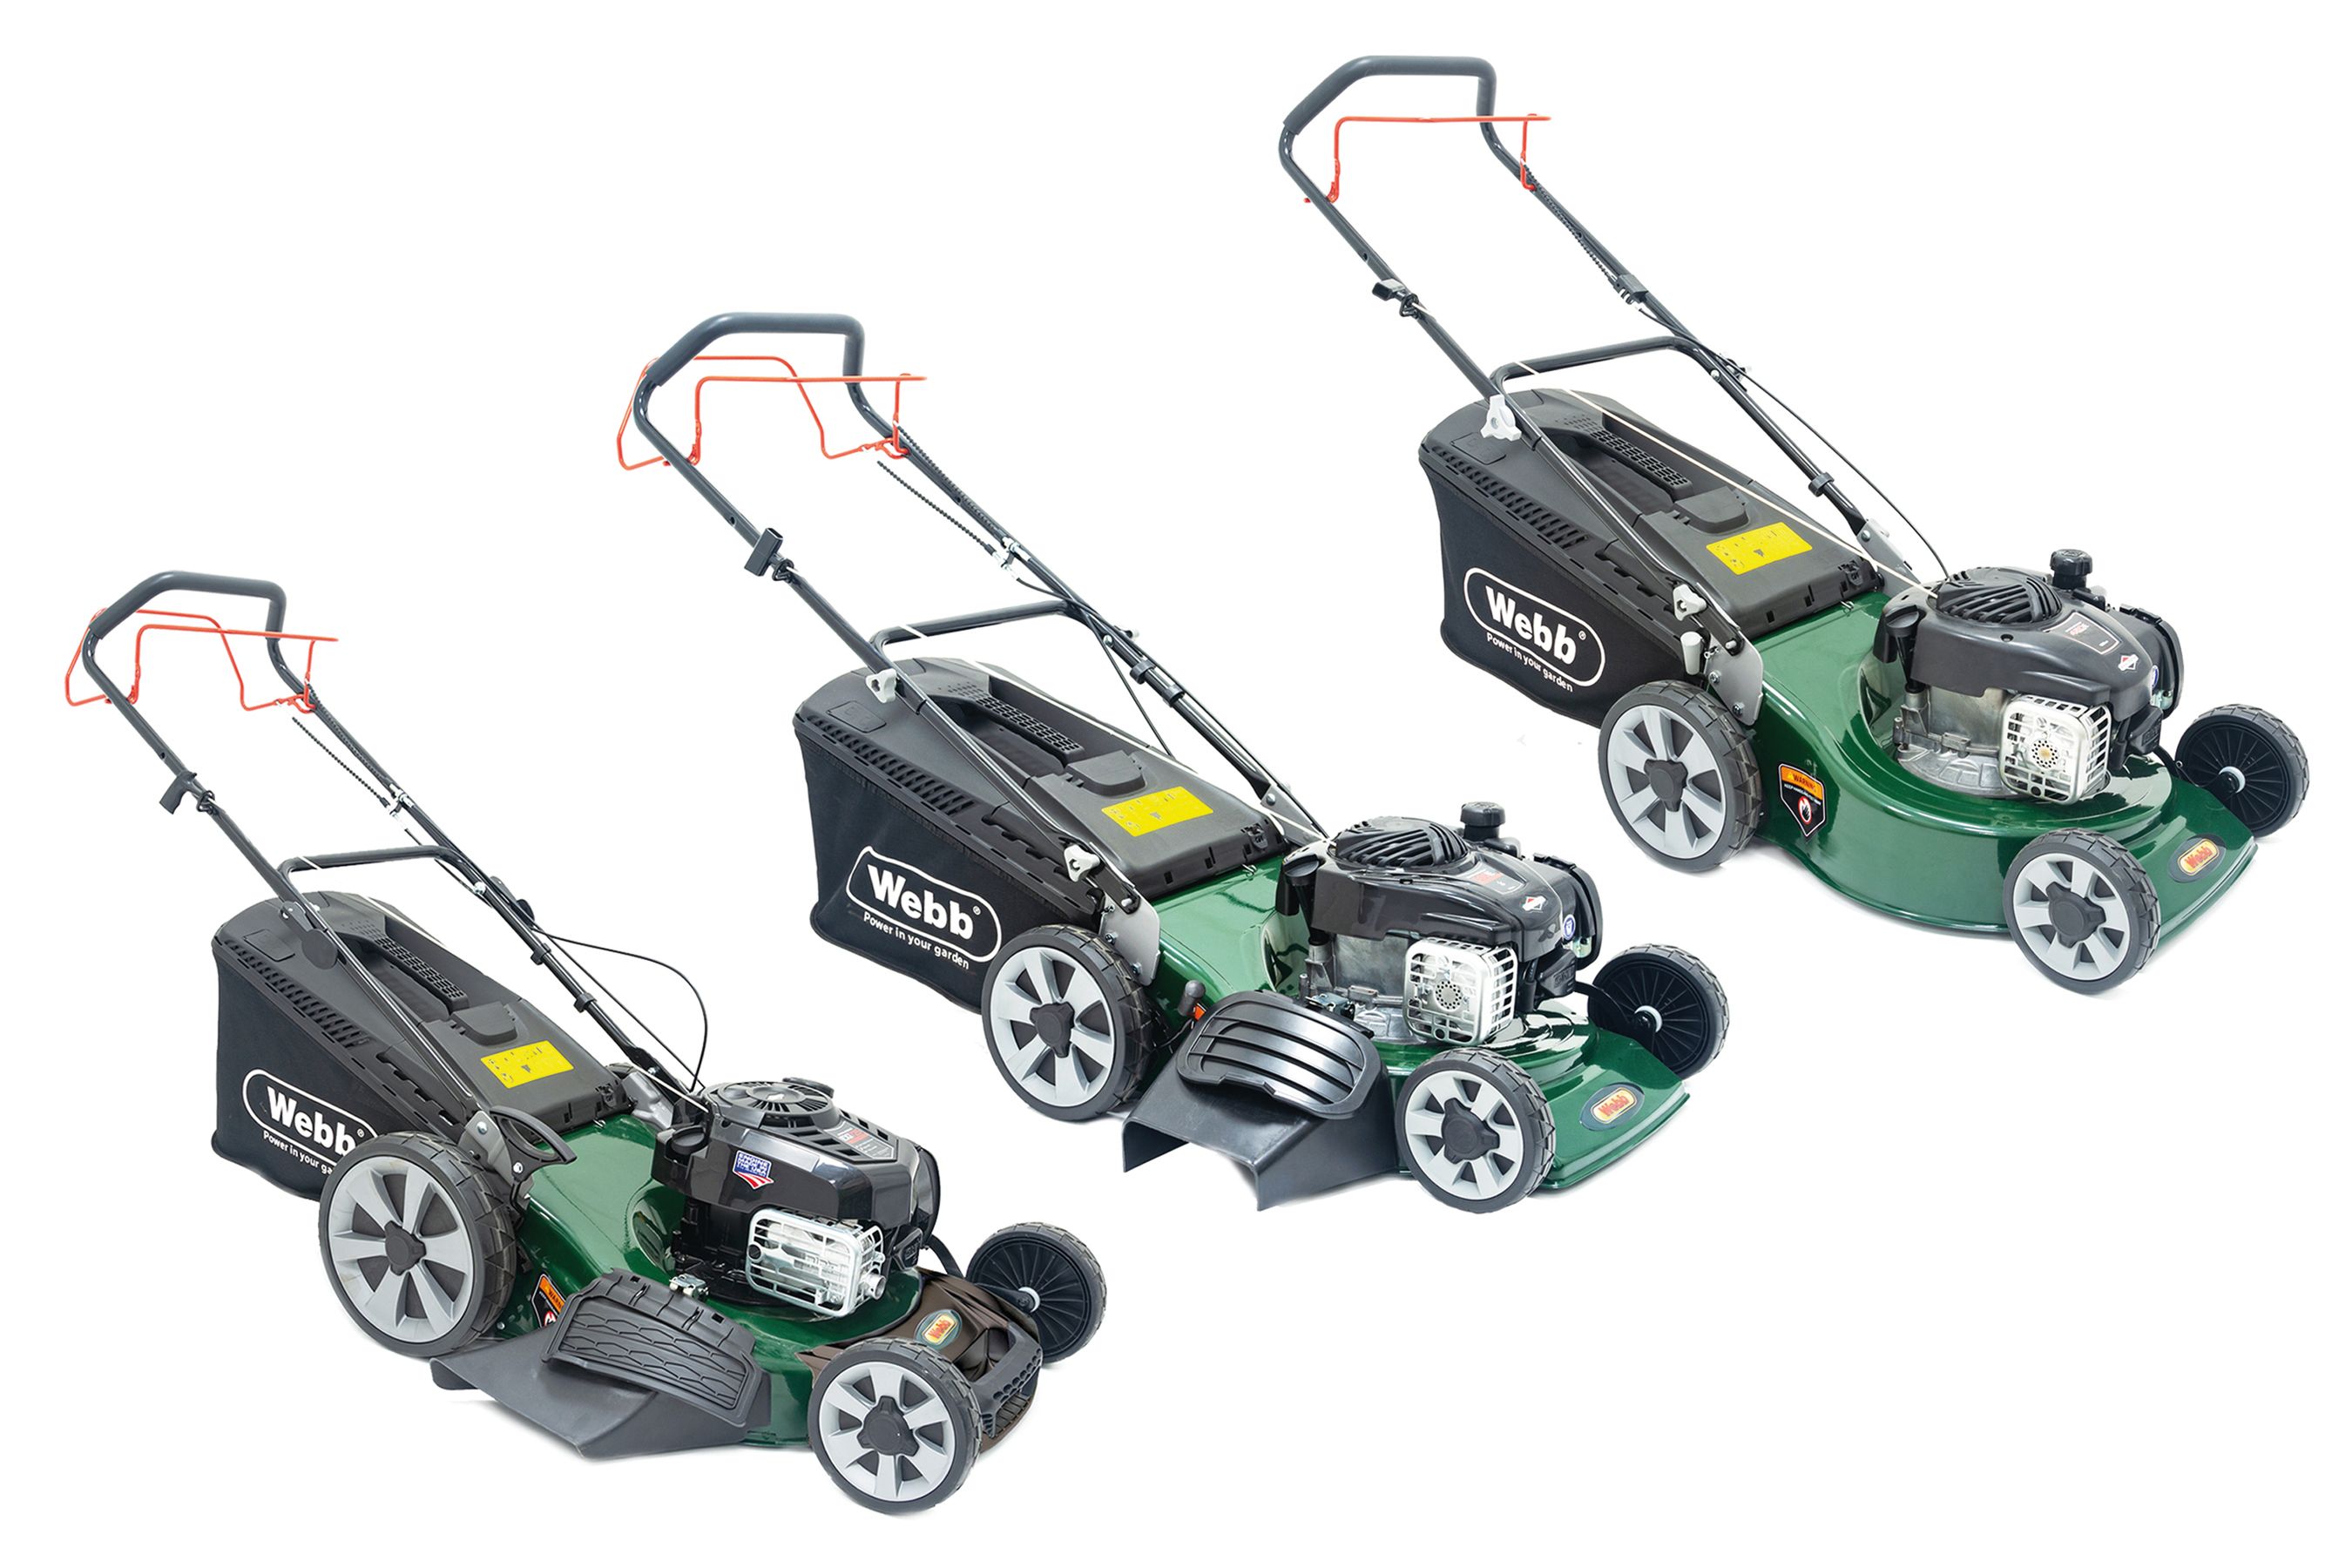 New Webb Supreme Range of Lawnmowers, designed to perform and built to last